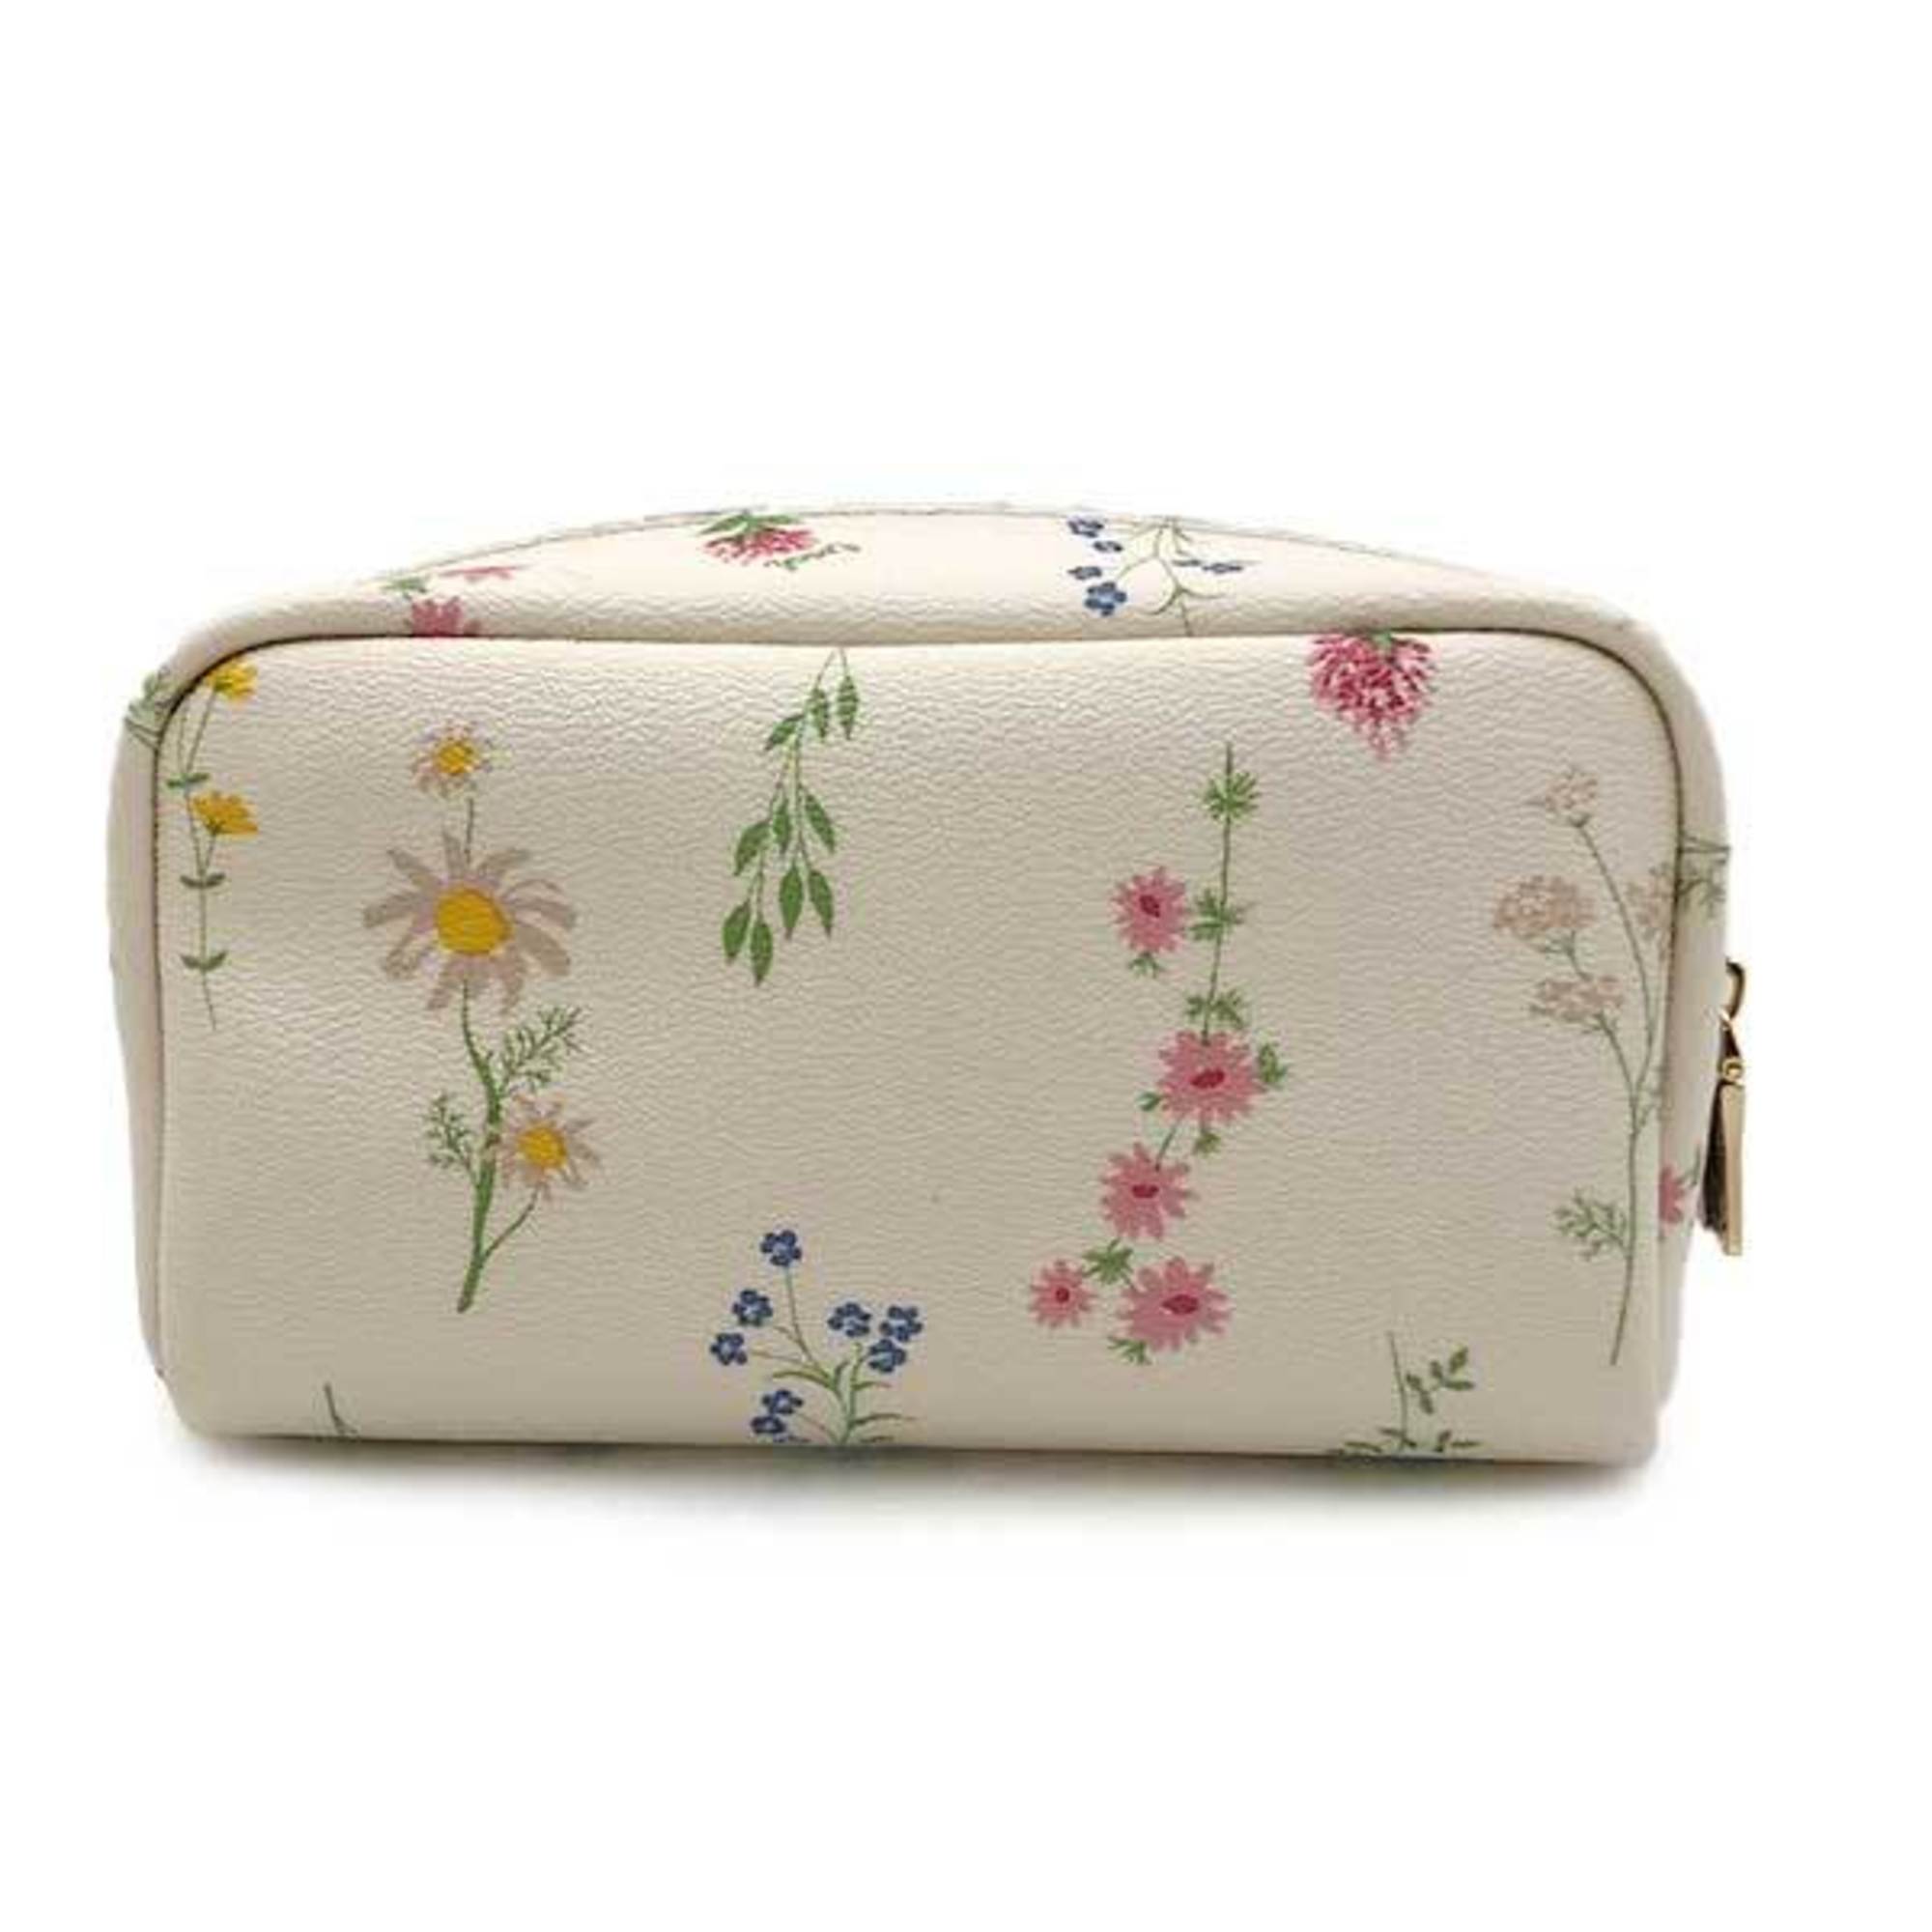 COACH Coach Pouch Floral Print Cosmetic White Ivory Ladies Accessory Case Fashion C0039